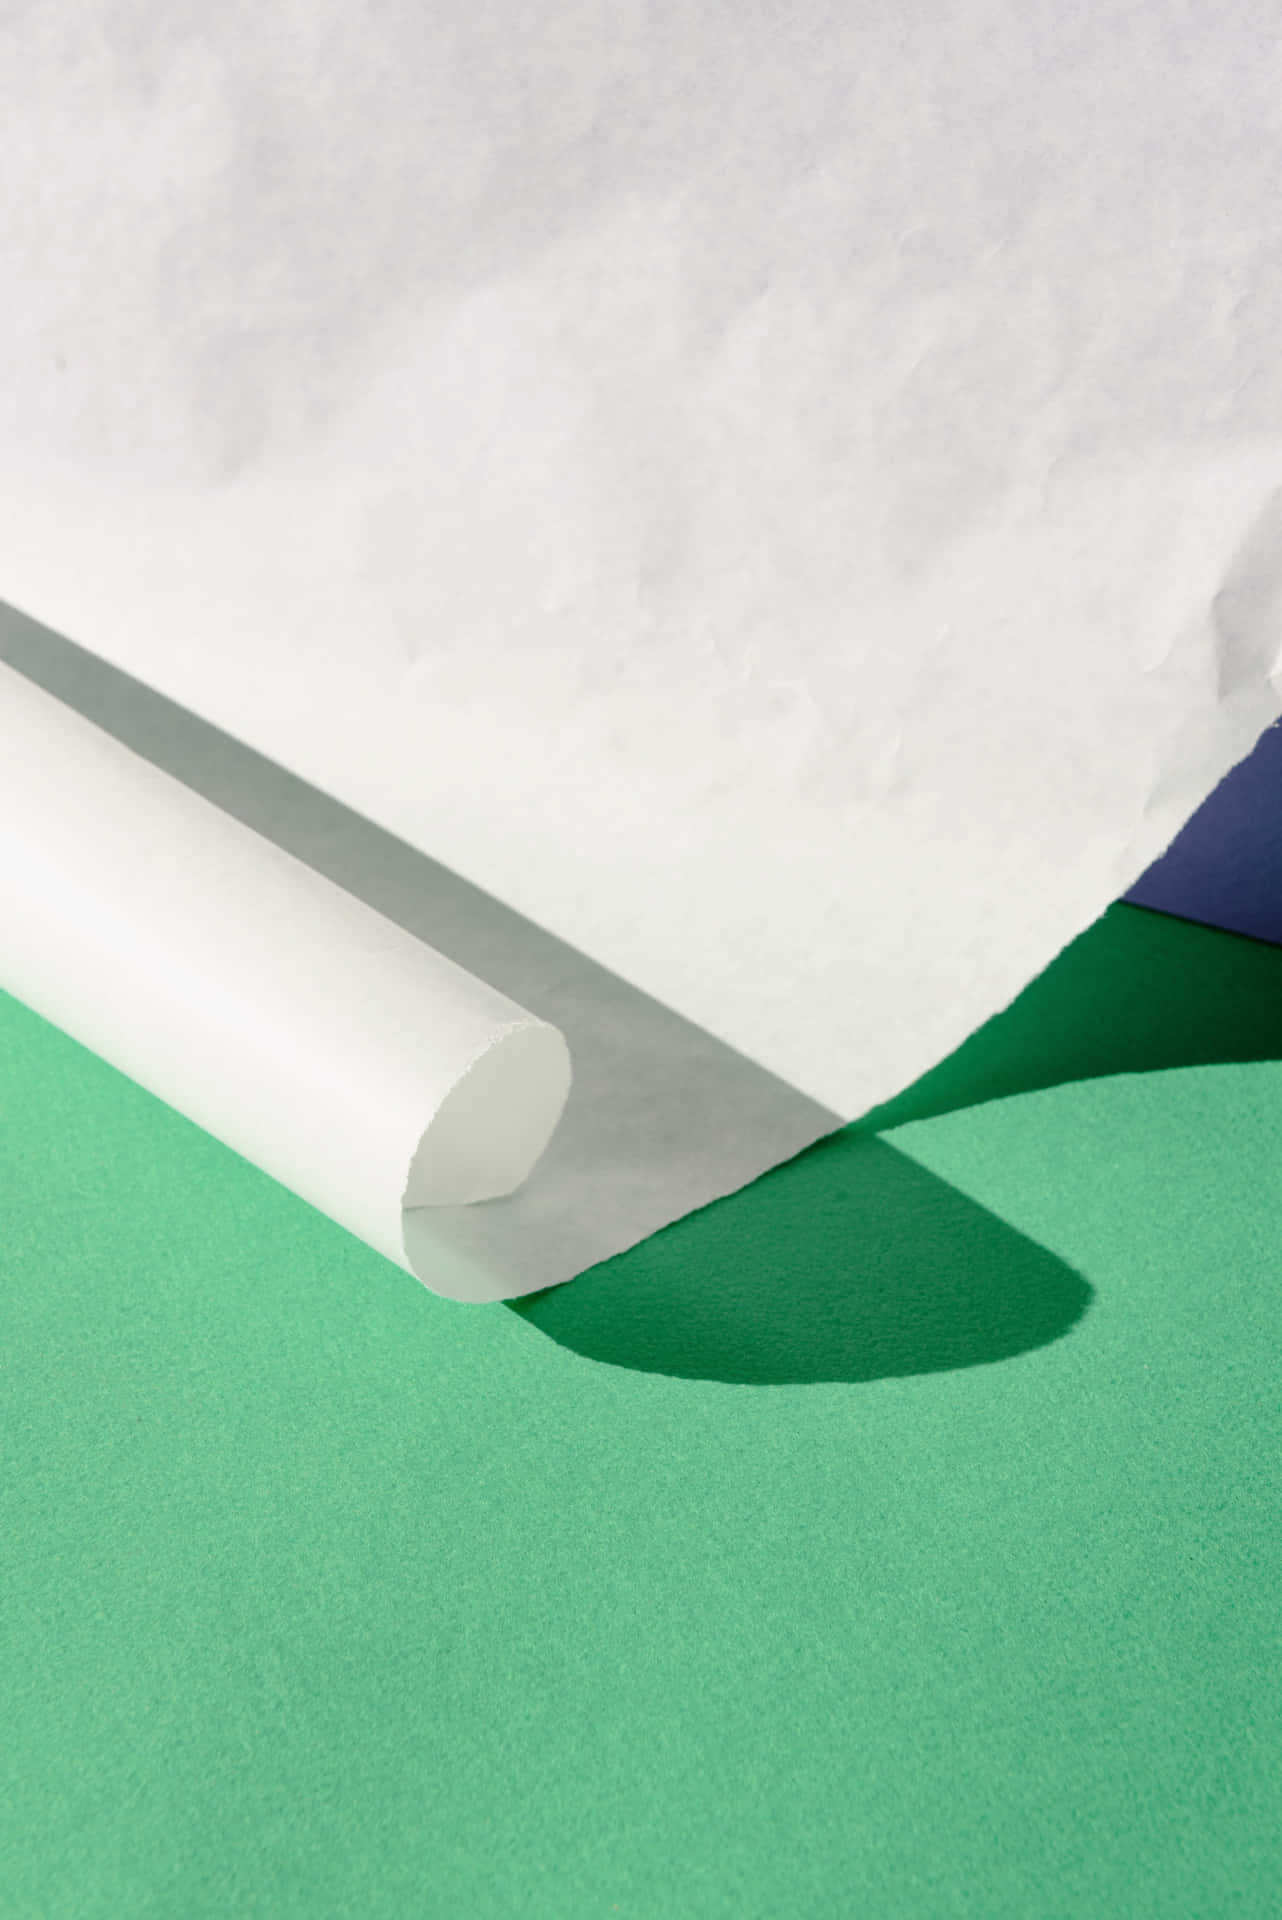 A White Roll Of Paper On A Green Surface